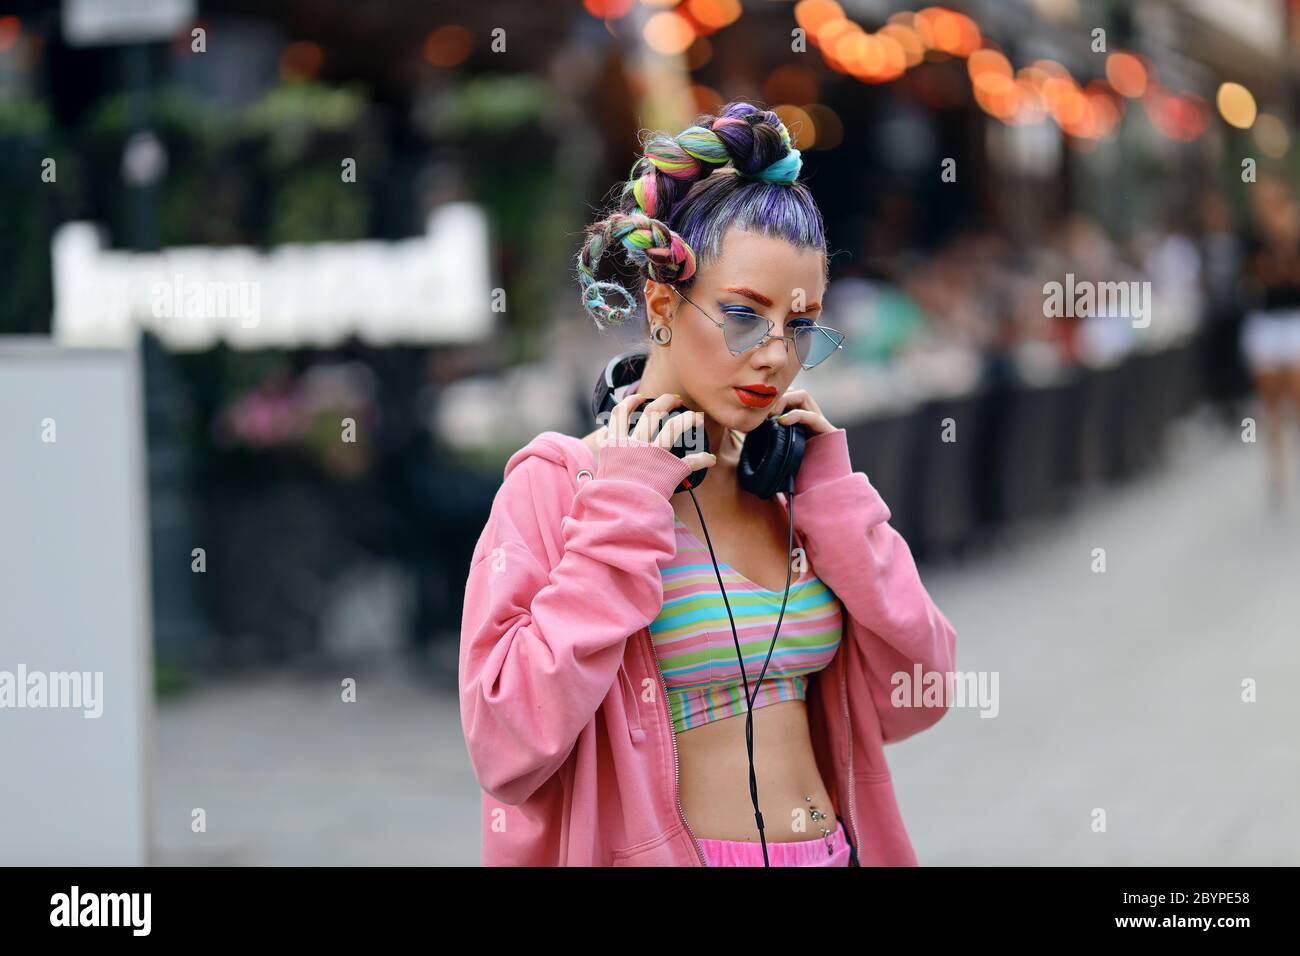 Fashion cool funky girl in headphones listening to music wearing colorful pink sweater and fancy sunglasses on the streets with pubs and bars in city Stock Photo